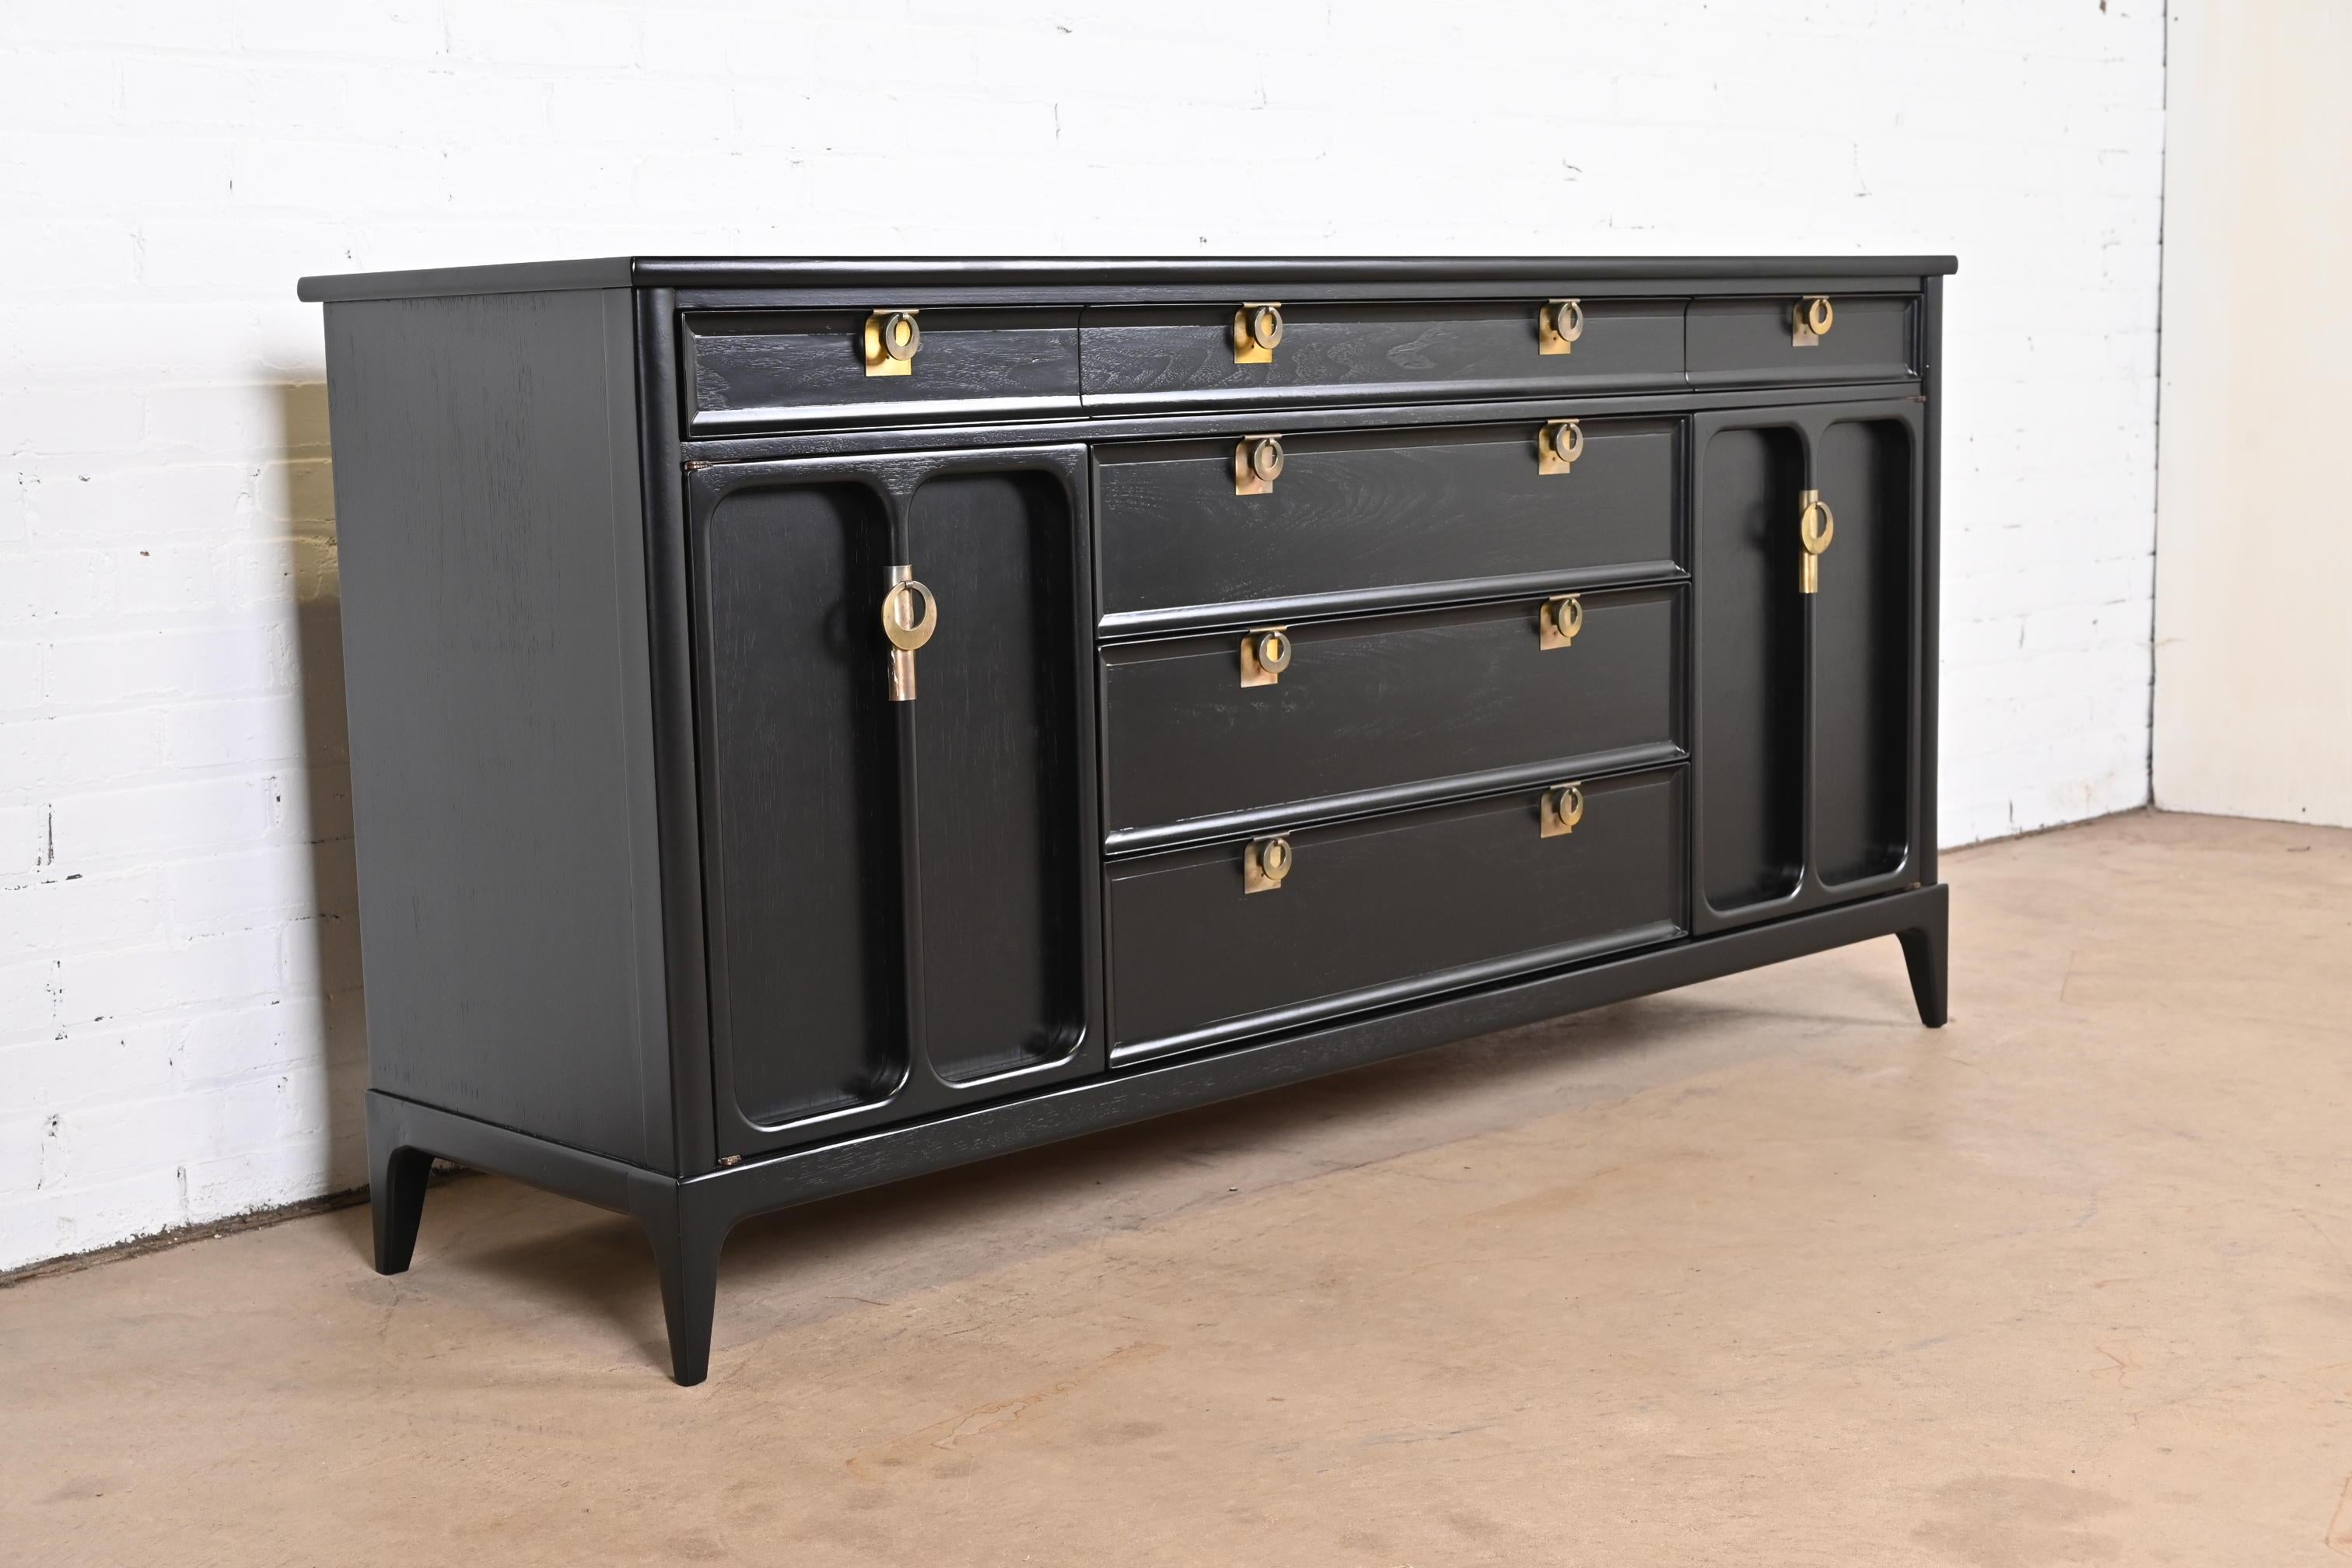 Brass Mid-Century Modern Black Lacquered Sideboard by White Furniture, Refinished